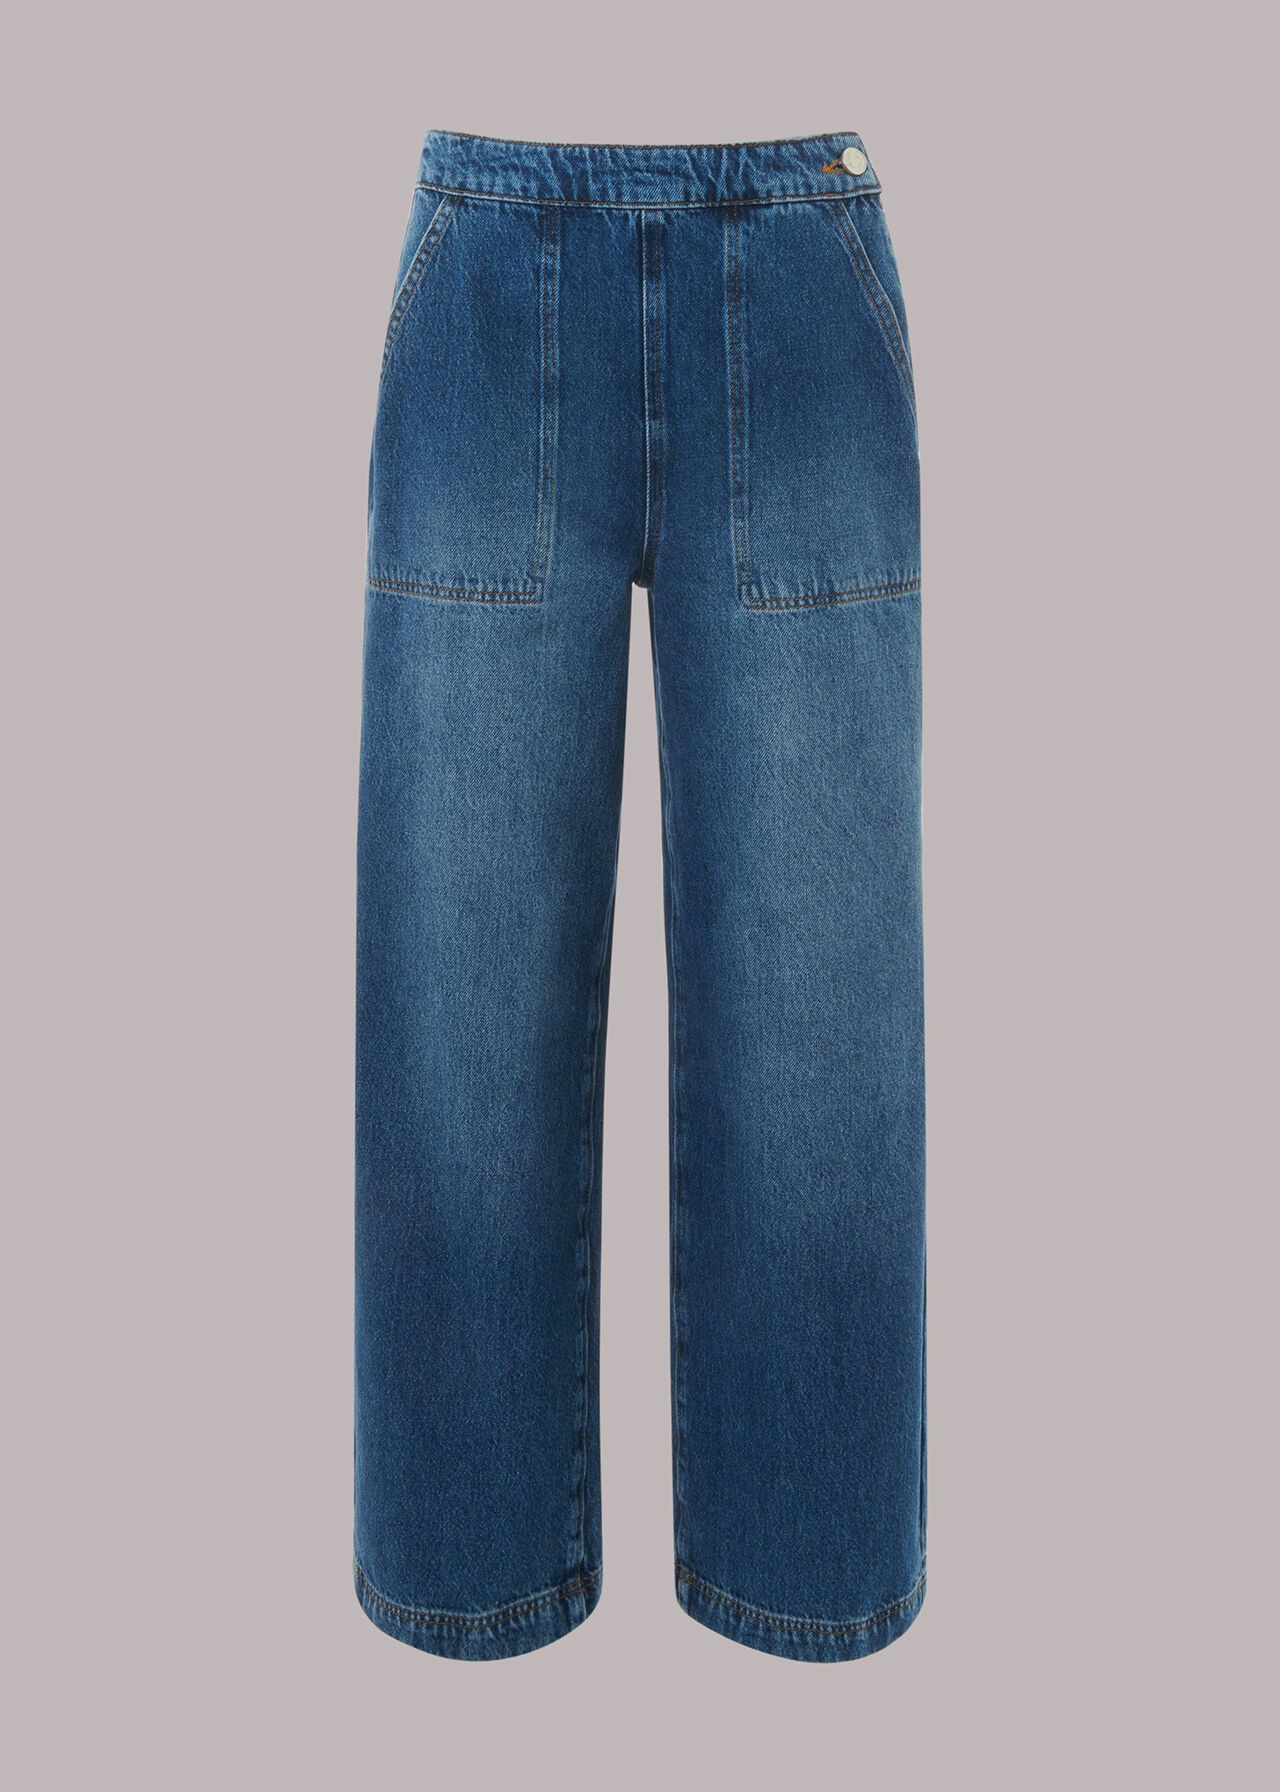 Authentic Side Zip Jean | Whistles